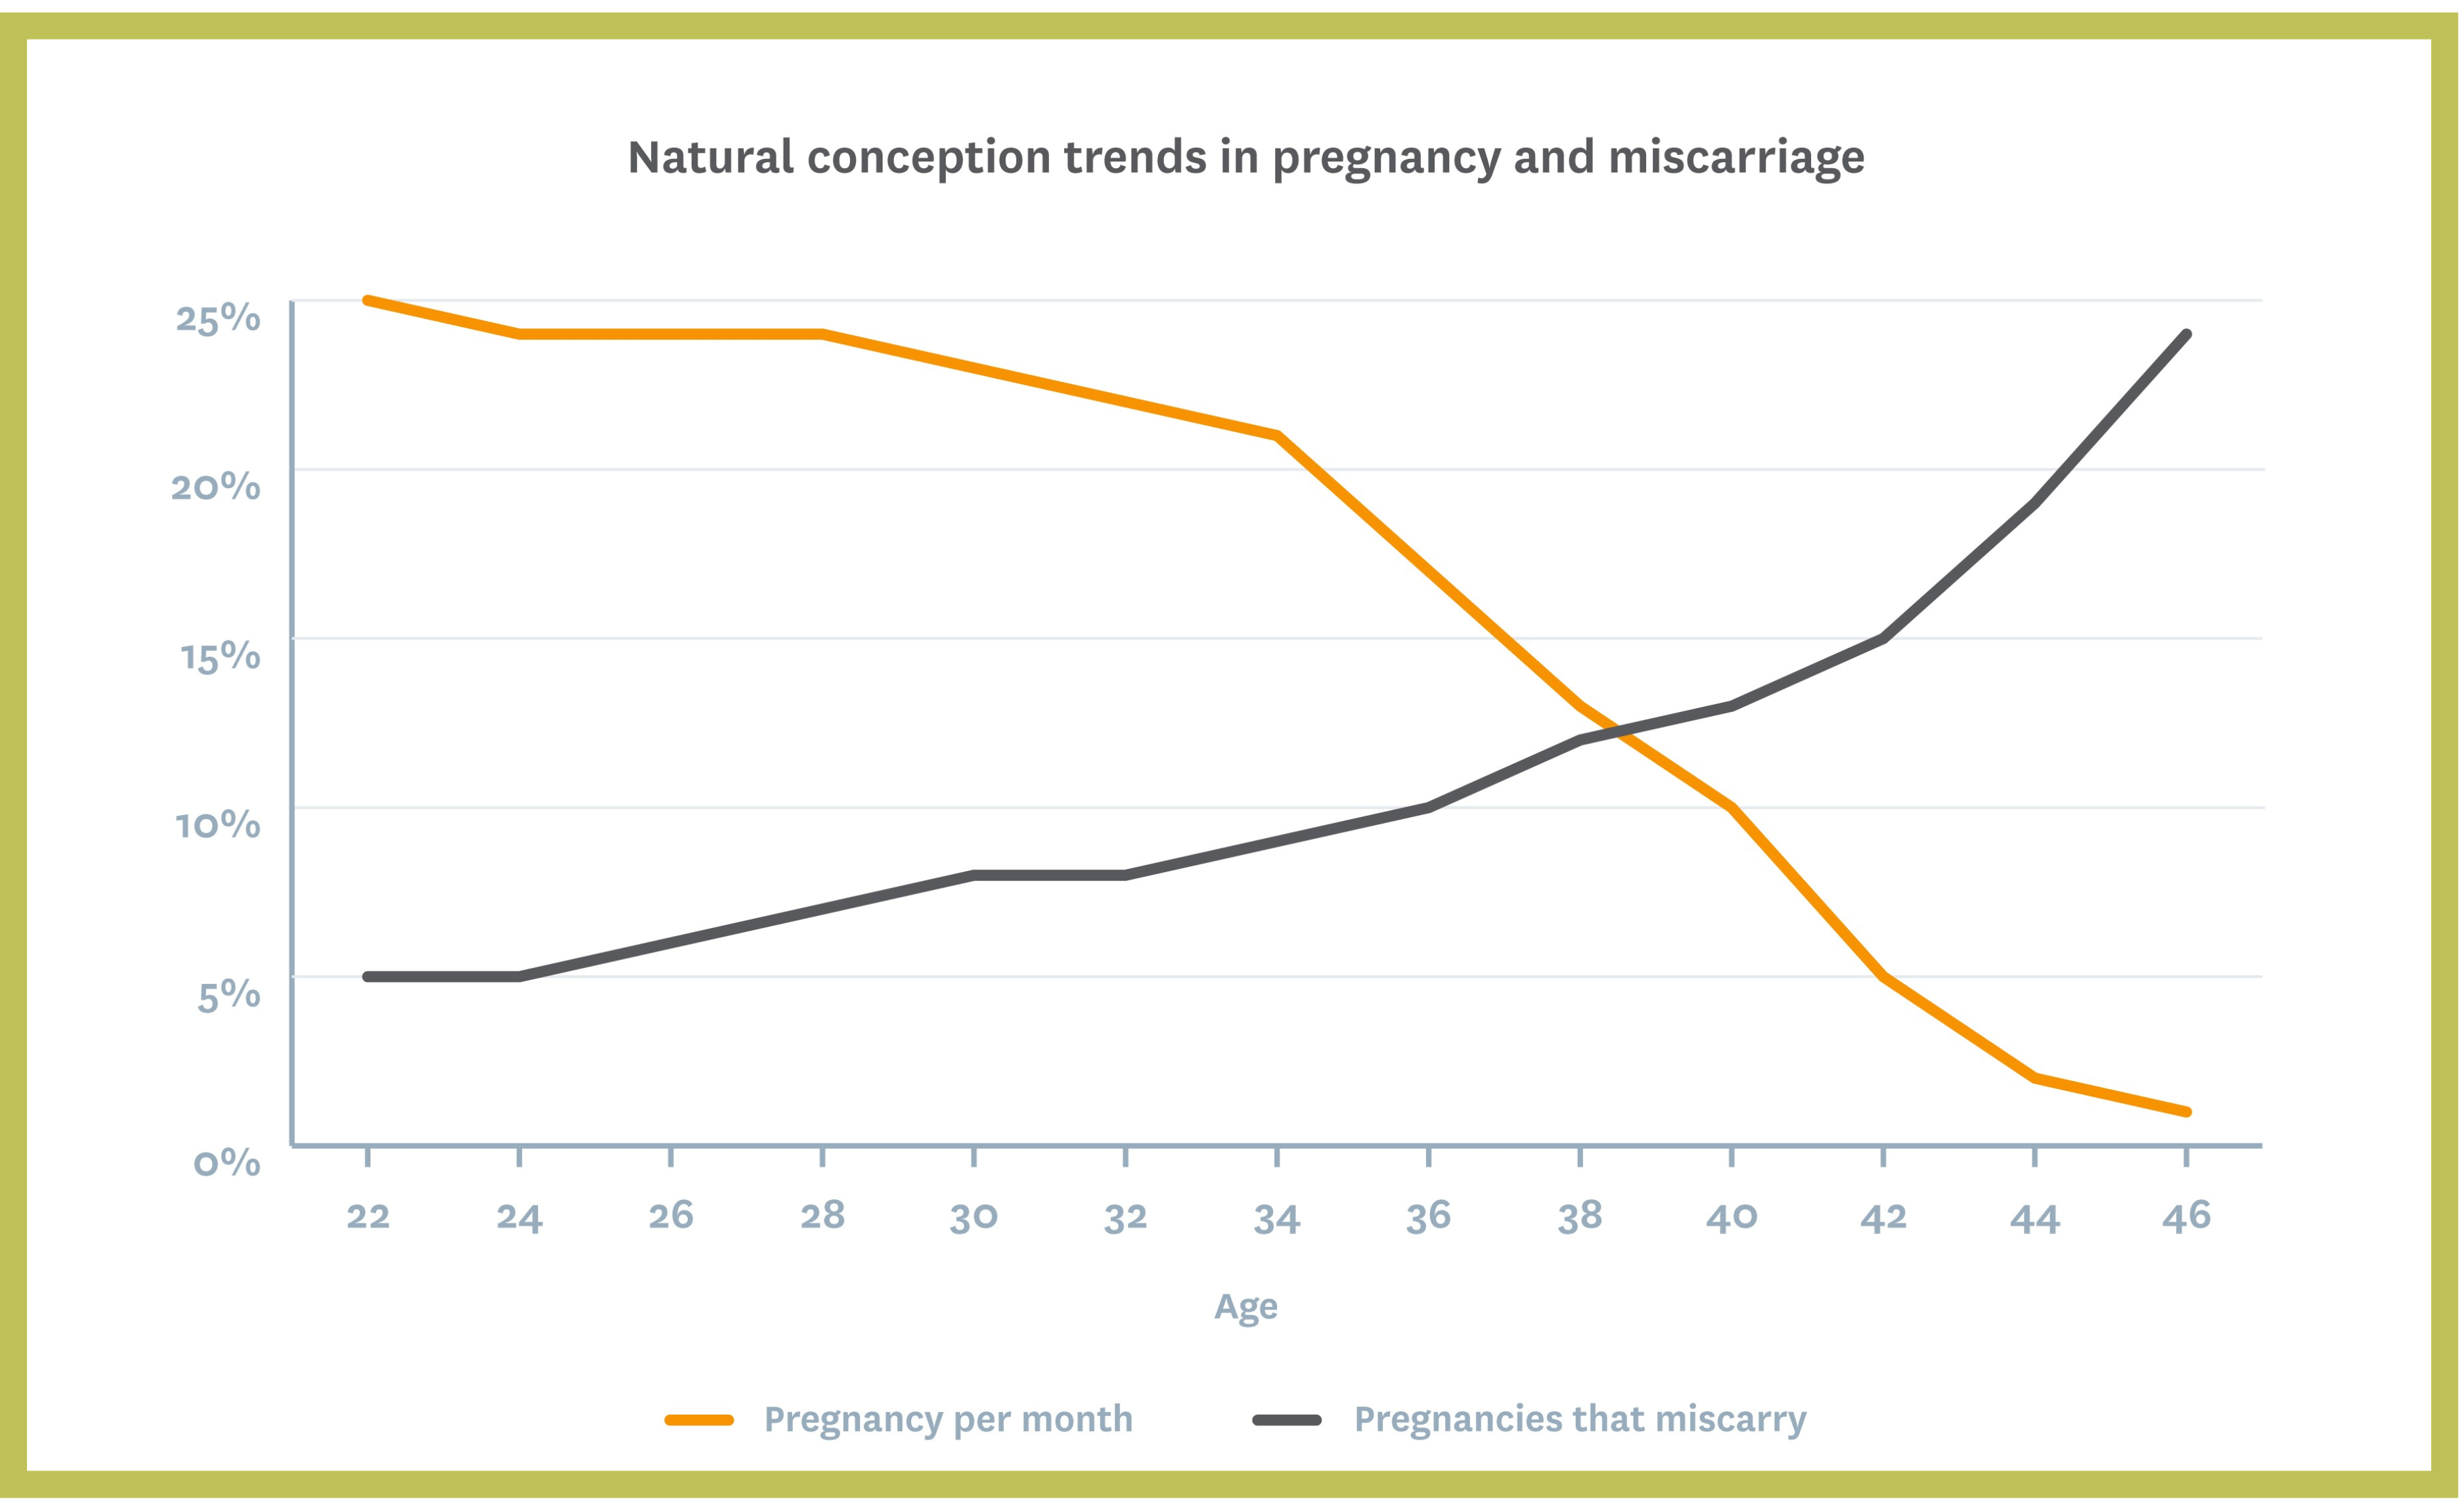 Natural conception trends in pregnancy and miscarriage